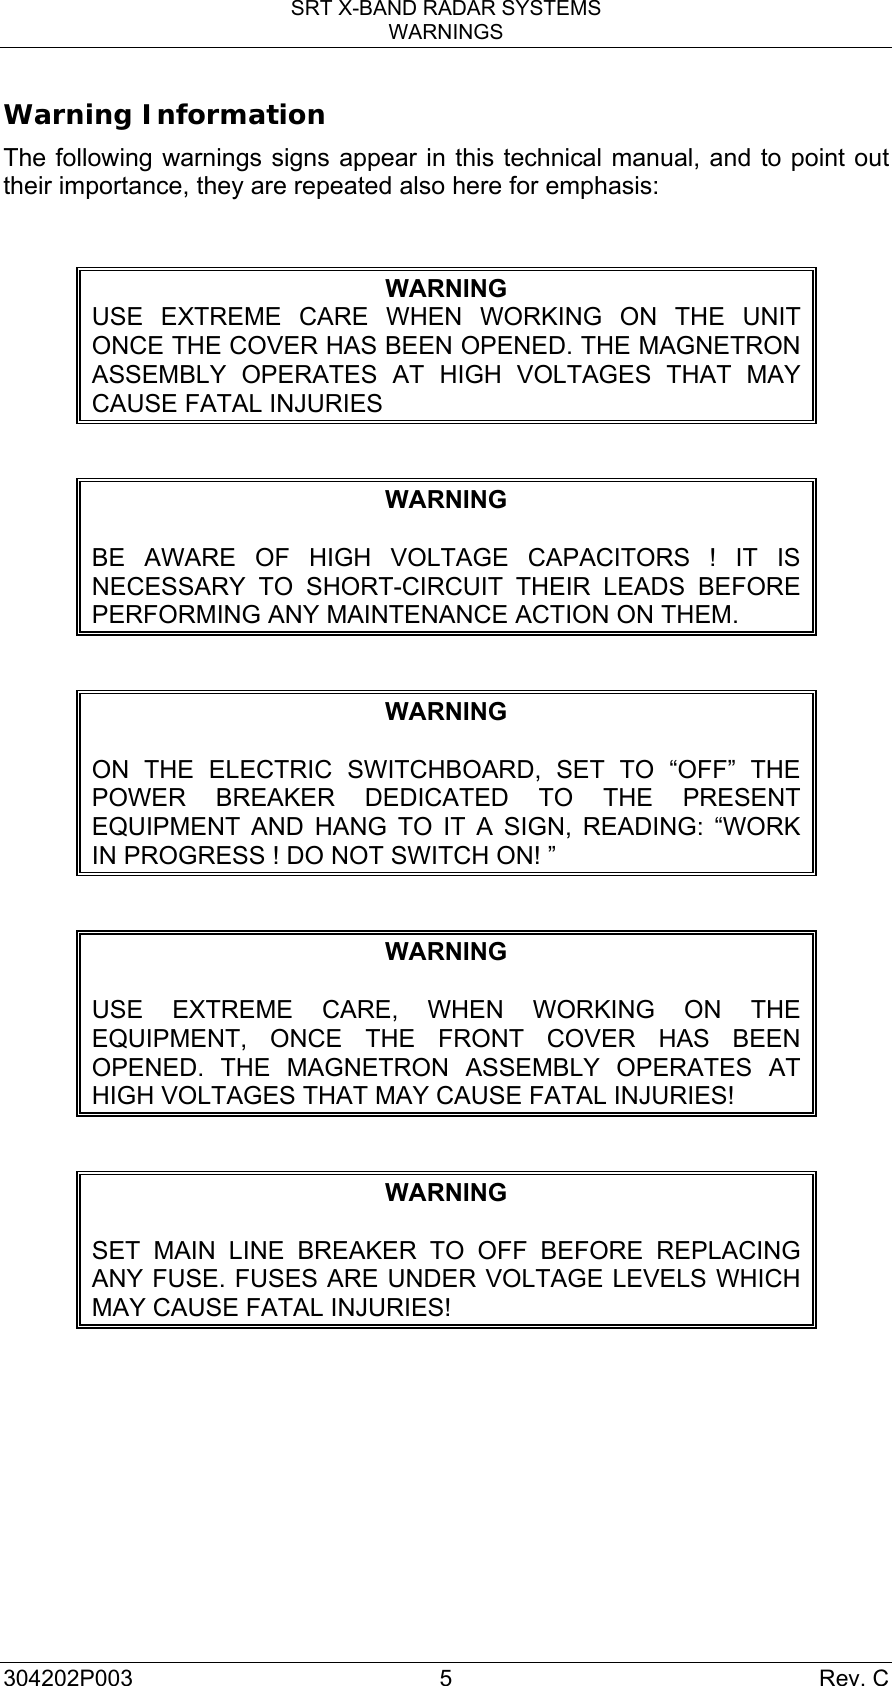 SRT X-BAND RADAR SYSTEMS WARNINGS 304202P003 5  Rev. C Warning Information The following warnings signs appear in this technical manual, and to point out their importance, they are repeated also here for emphasis:  WARNING USE EXTREME CARE WHEN WORKING ON THE UNIT ONCE THE COVER HAS BEEN OPENED. THE MAGNETRON ASSEMBLY OPERATES AT HIGH VOLTAGES THAT MAY CAUSE FATAL INJURIES  WARNING  BE AWARE OF HIGH VOLTAGE CAPACITORS ! IT IS NECESSARY TO SHORT-CIRCUIT THEIR LEADS BEFORE PERFORMING ANY MAINTENANCE ACTION ON THEM.  WARNING  ON THE ELECTRIC SWITCHBOARD, SET TO “OFF” THE POWER BREAKER DEDICATED TO THE PRESENT EQUIPMENT AND HANG TO IT A SIGN, READING: “WORK IN PROGRESS ! DO NOT SWITCH ON! ”  WARNING  USE EXTREME CARE, WHEN WORKING ON THE EQUIPMENT, ONCE THE FRONT COVER HAS BEEN OPENED. THE MAGNETRON ASSEMBLY OPERATES AT HIGH VOLTAGES THAT MAY CAUSE FATAL INJURIES!  WARNING  SET MAIN LINE BREAKER TO OFF BEFORE REPLACING ANY FUSE. FUSES ARE UNDER VOLTAGE LEVELS WHICH MAY CAUSE FATAL INJURIES!  